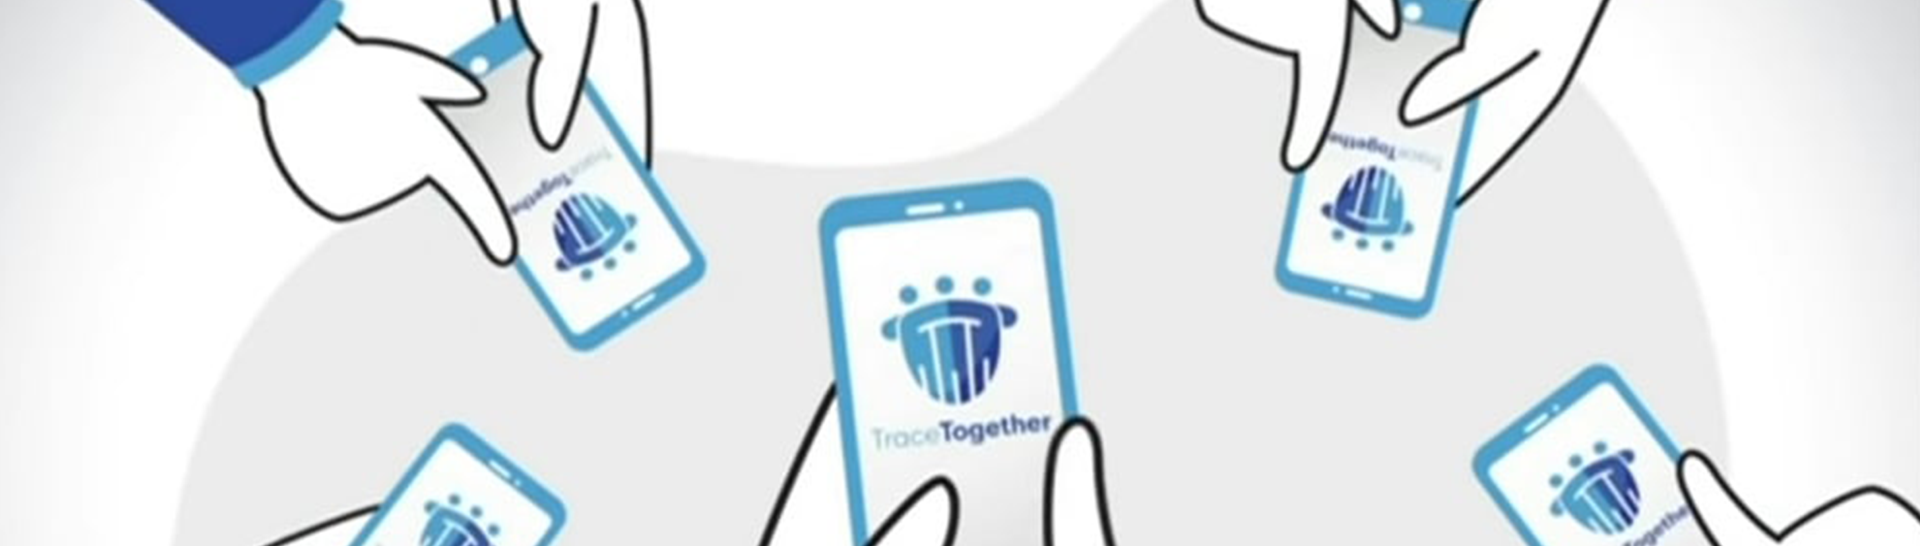 TraceTogether What we know so far resized